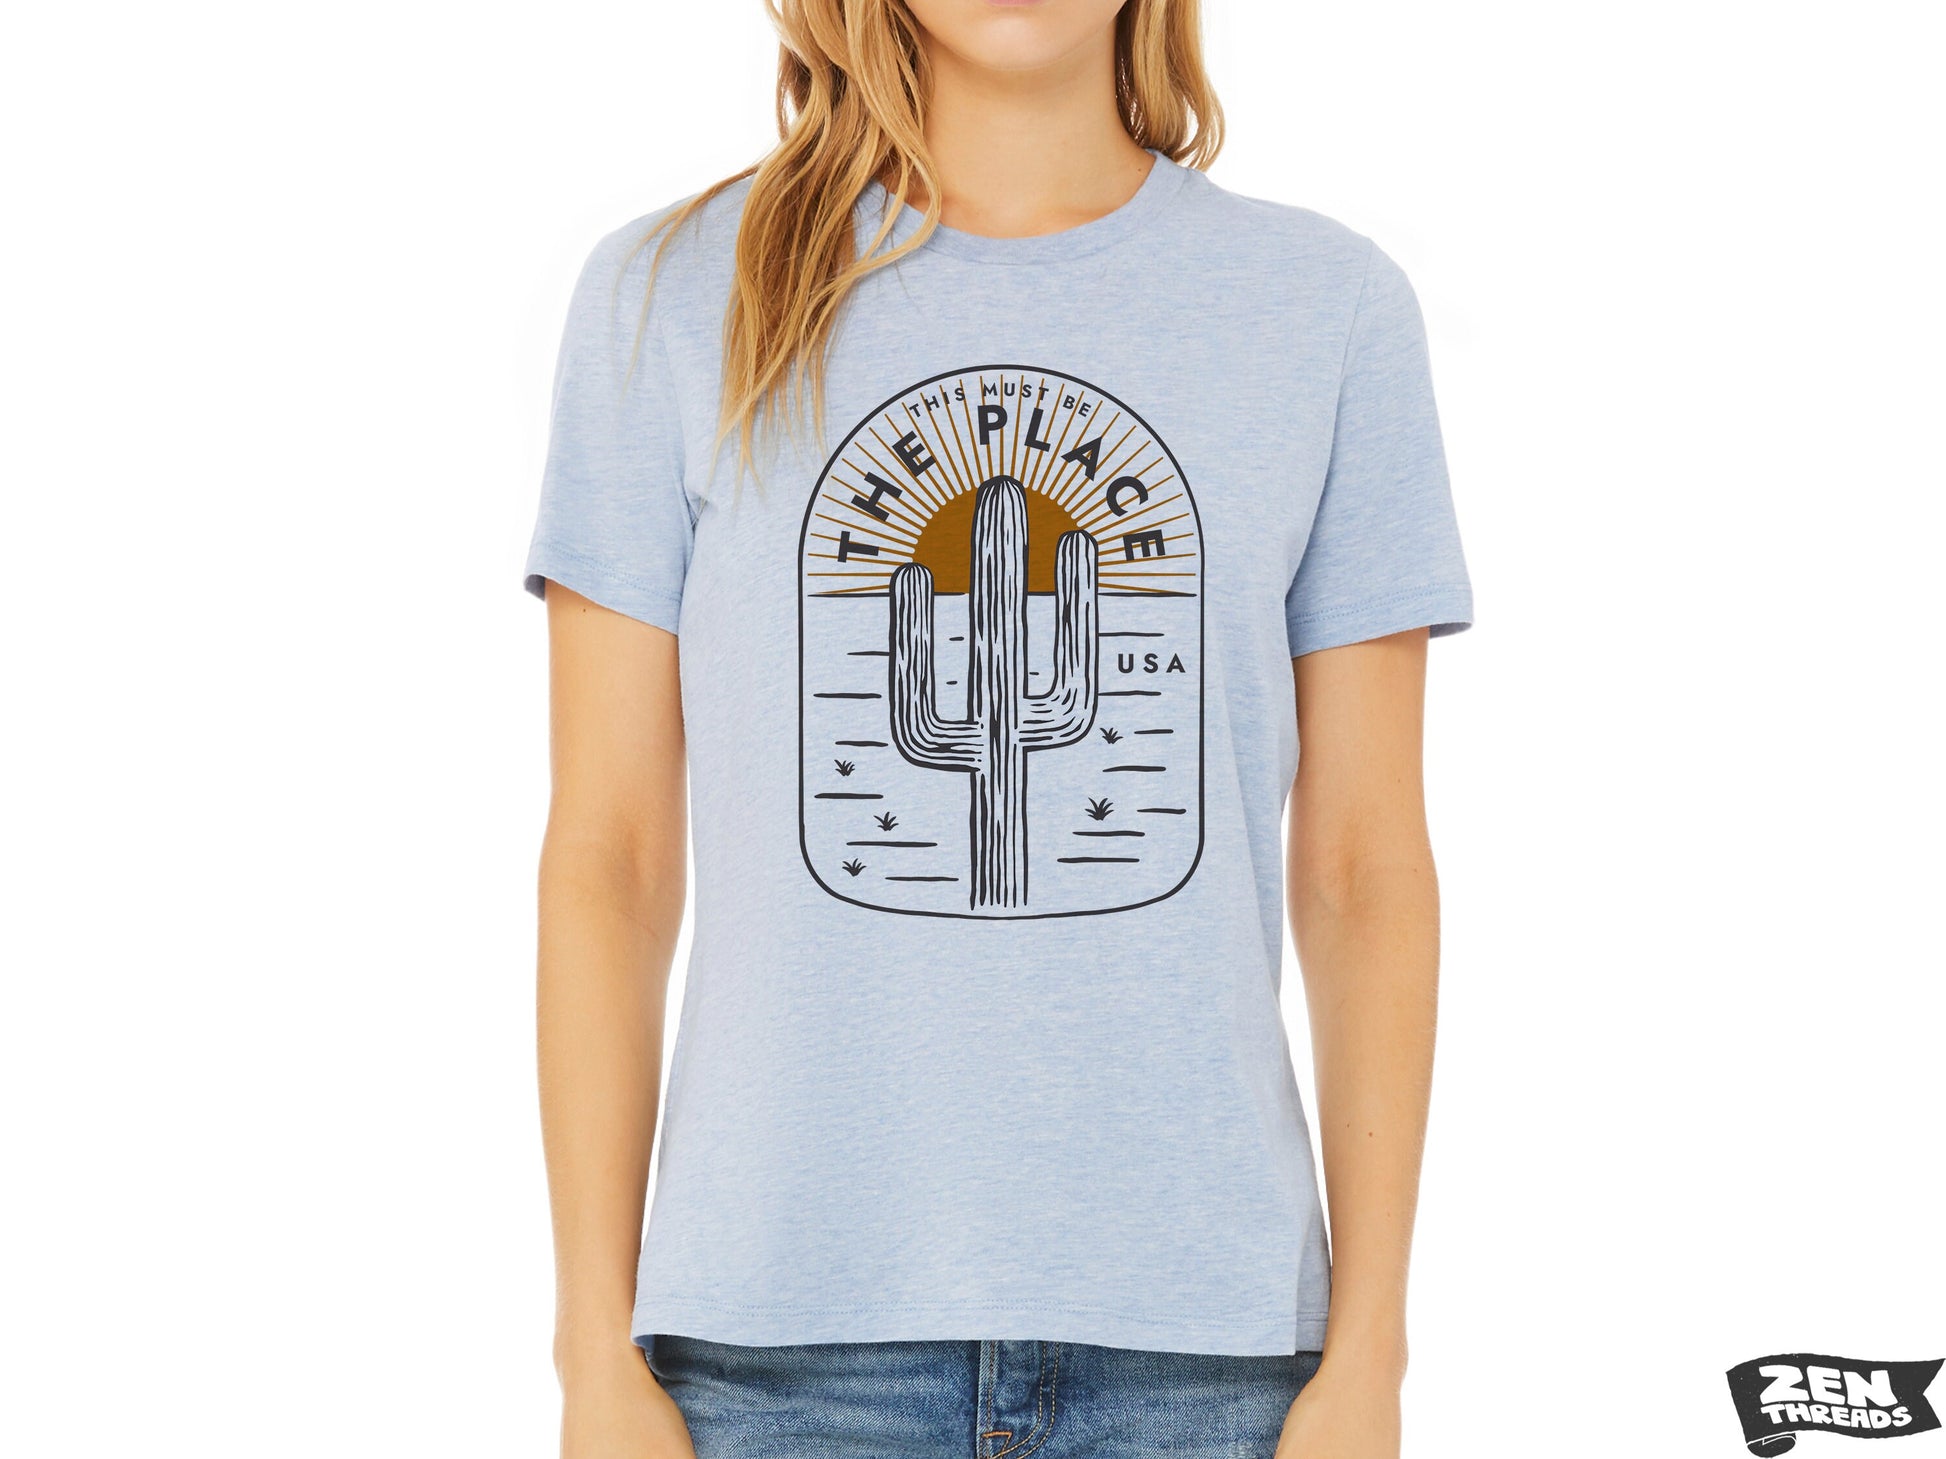 This Must Be The Place Womens Boyfriend Tee National Park relaxed T-shirt Zen Threads Bella Canvas Texas desert hiking camping nature gift